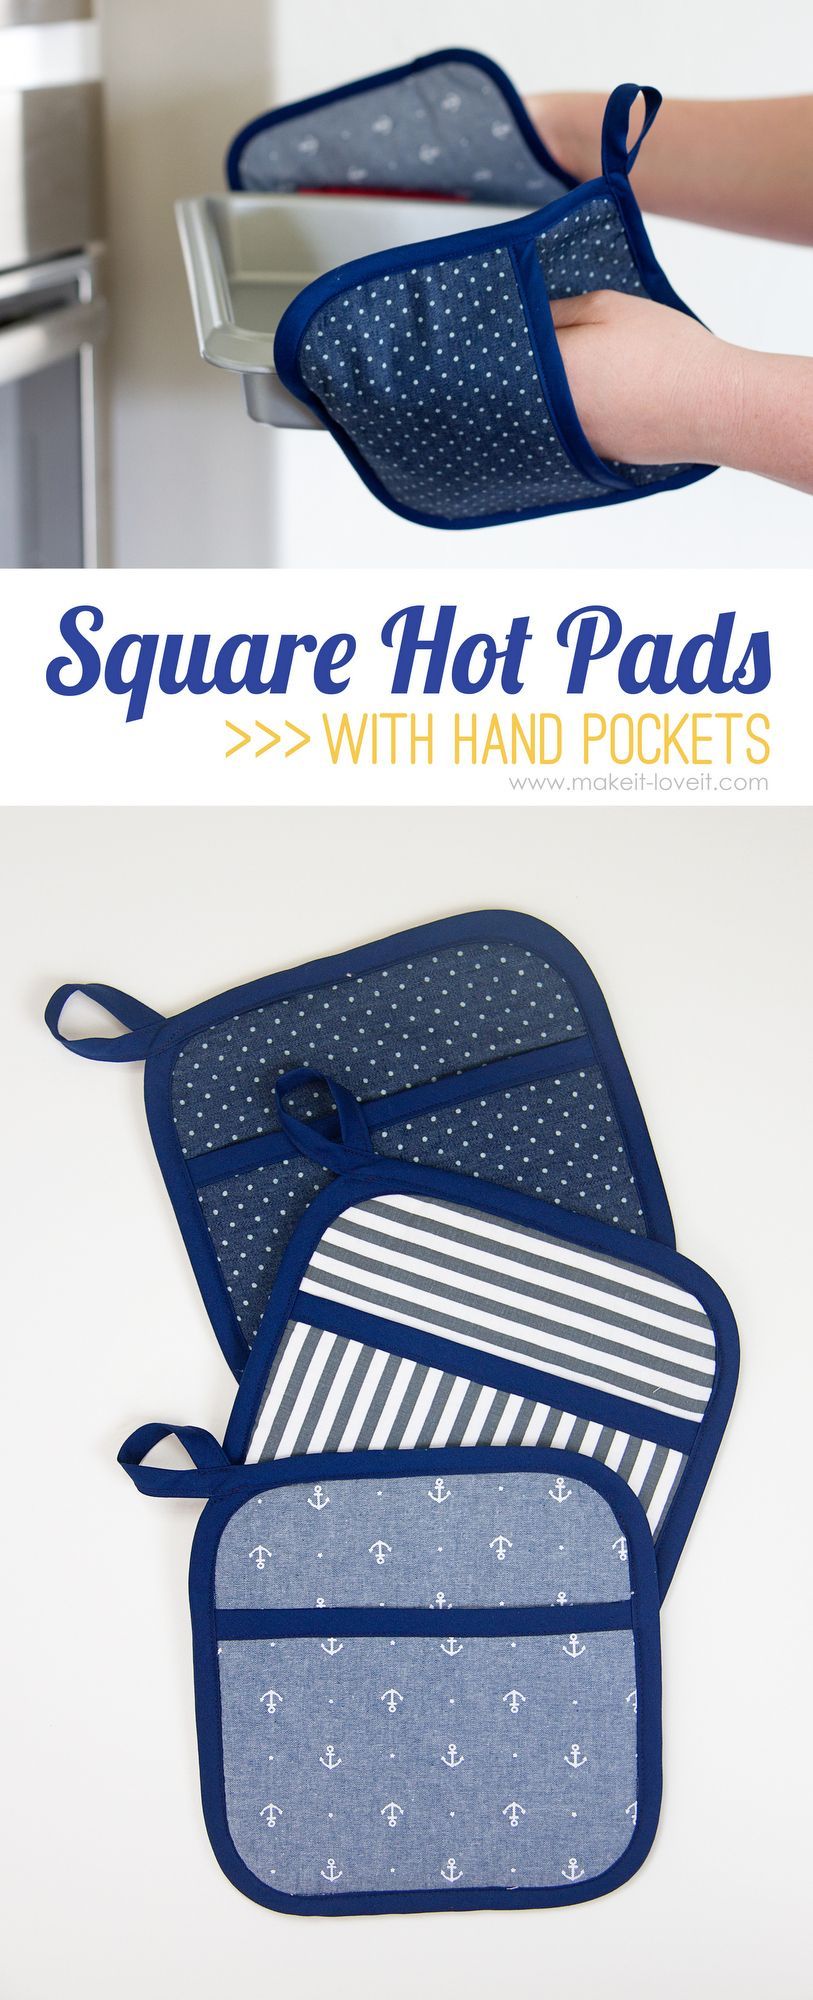 DIY Square Hot Pads…with Hand Pockets | via Make It and Love It